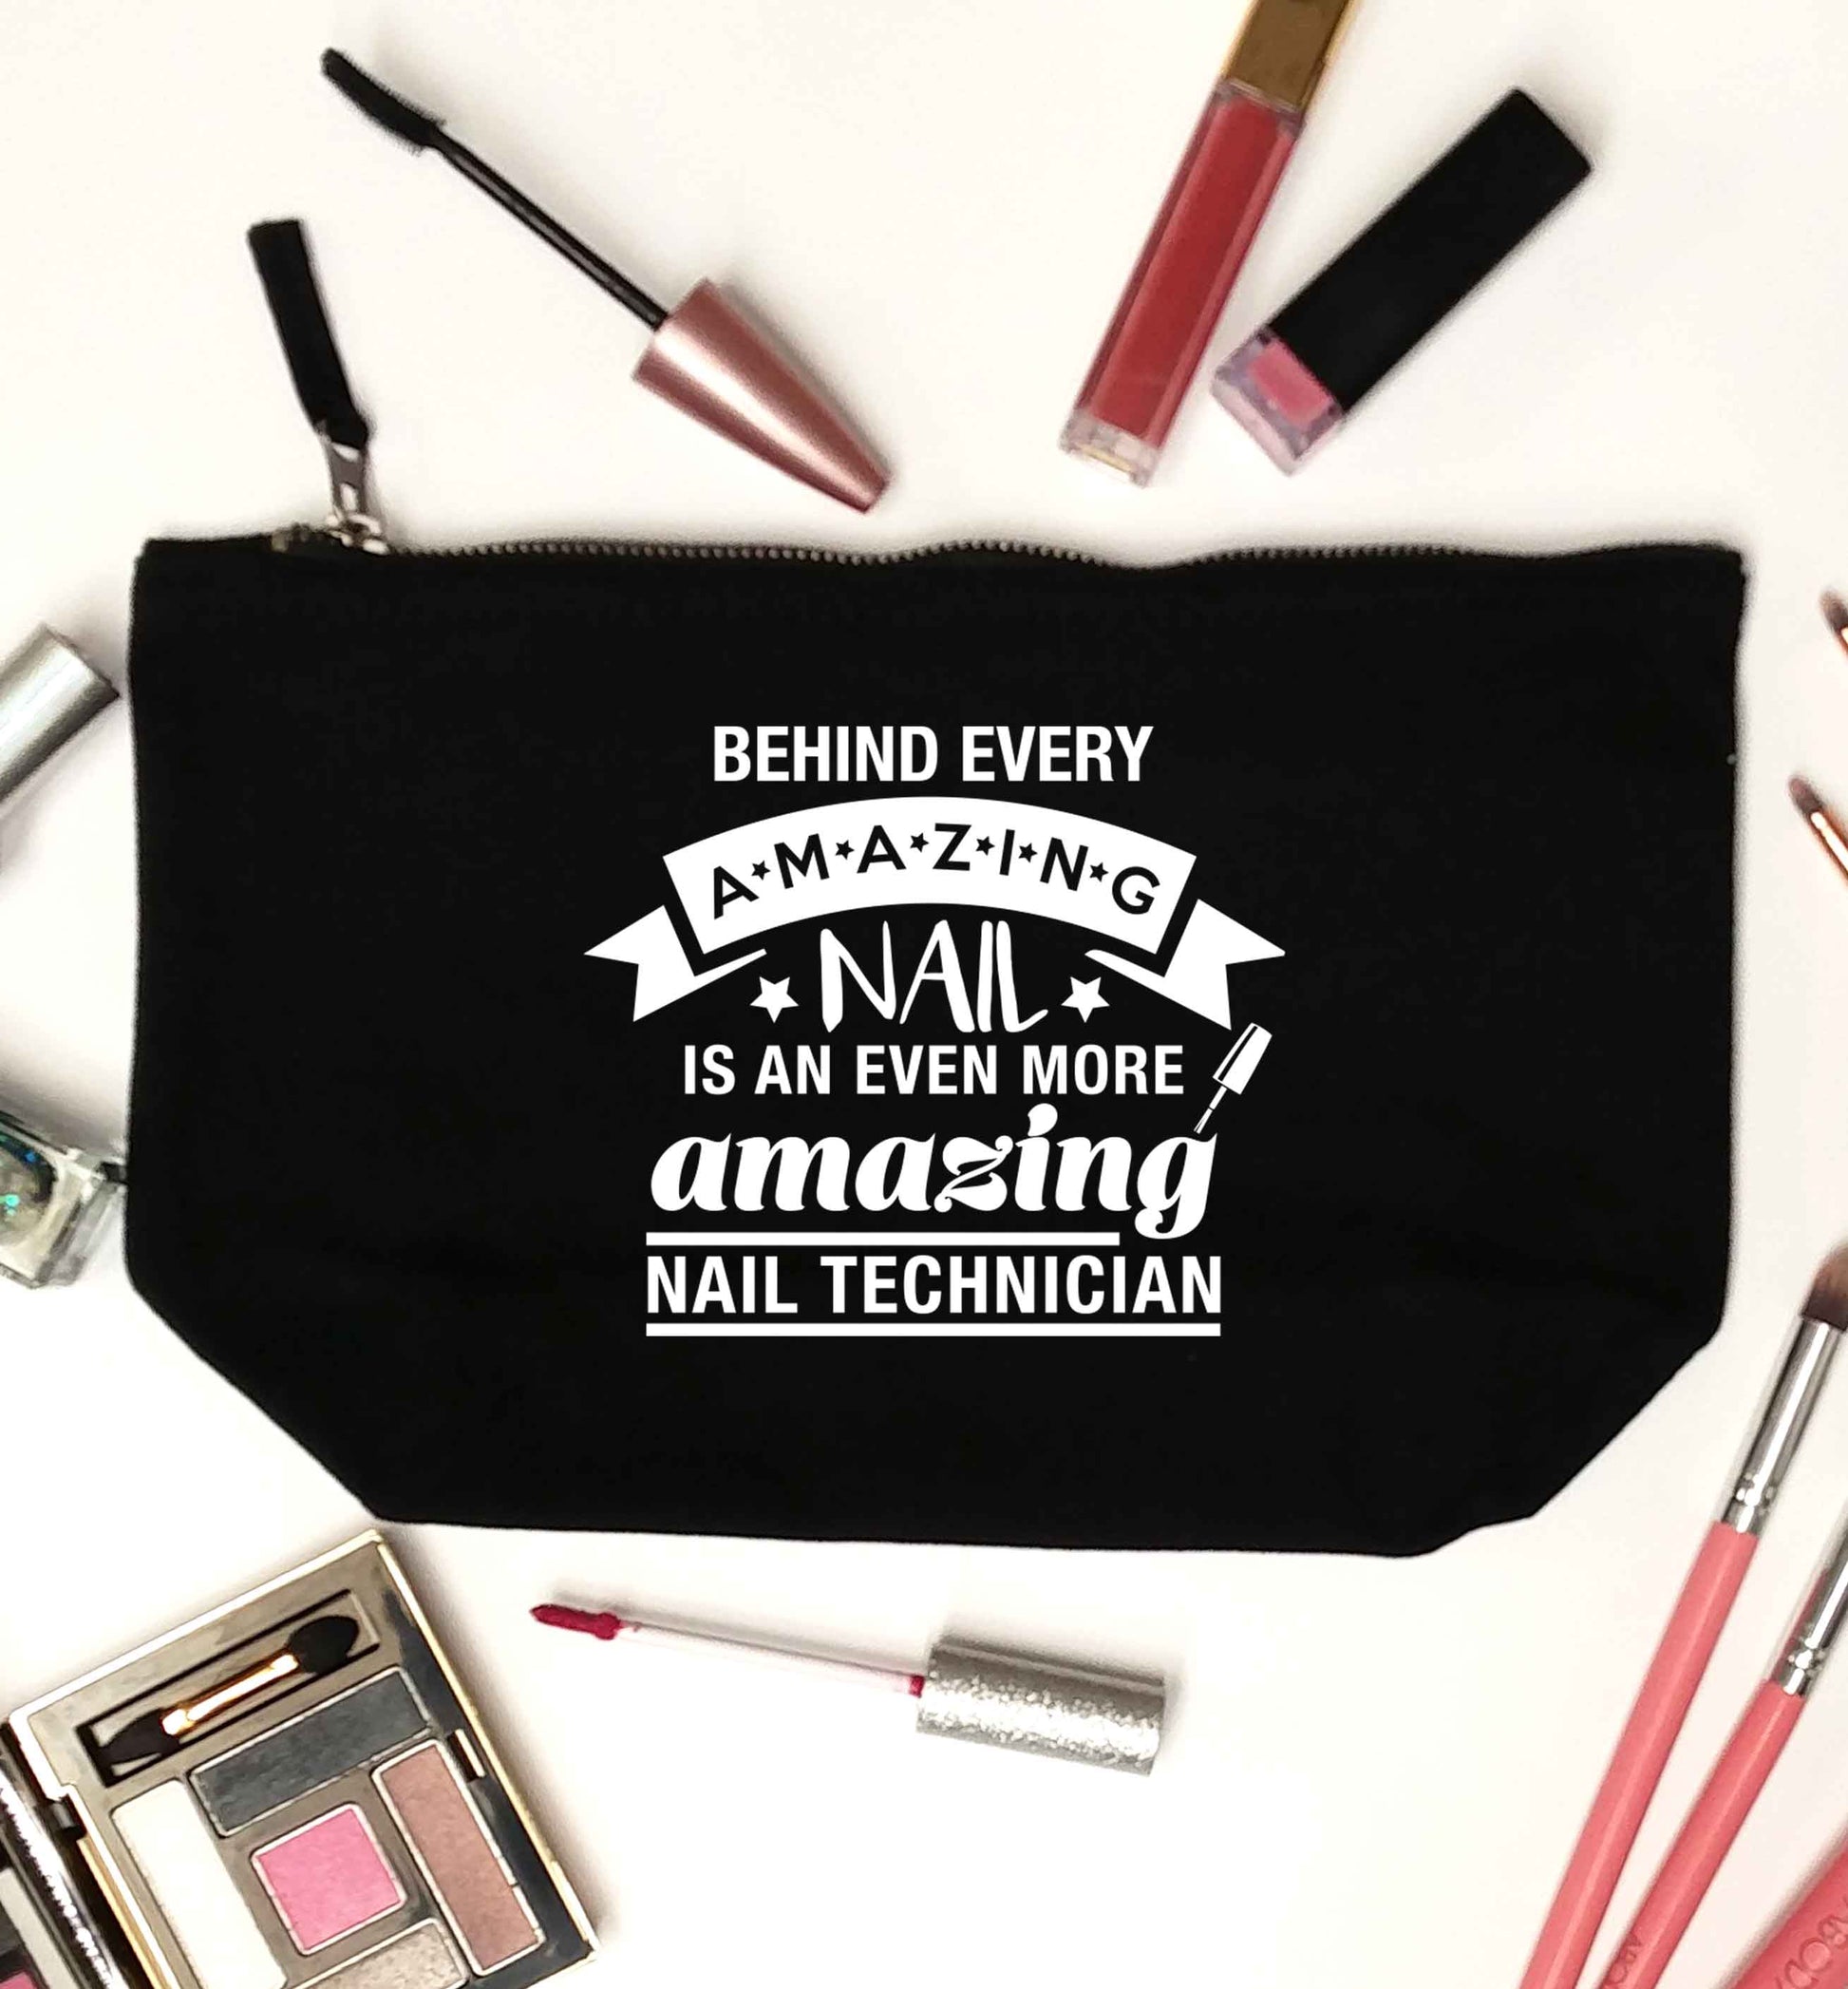 Behind every amazing nail is an even more amazing nail technician black makeup bag